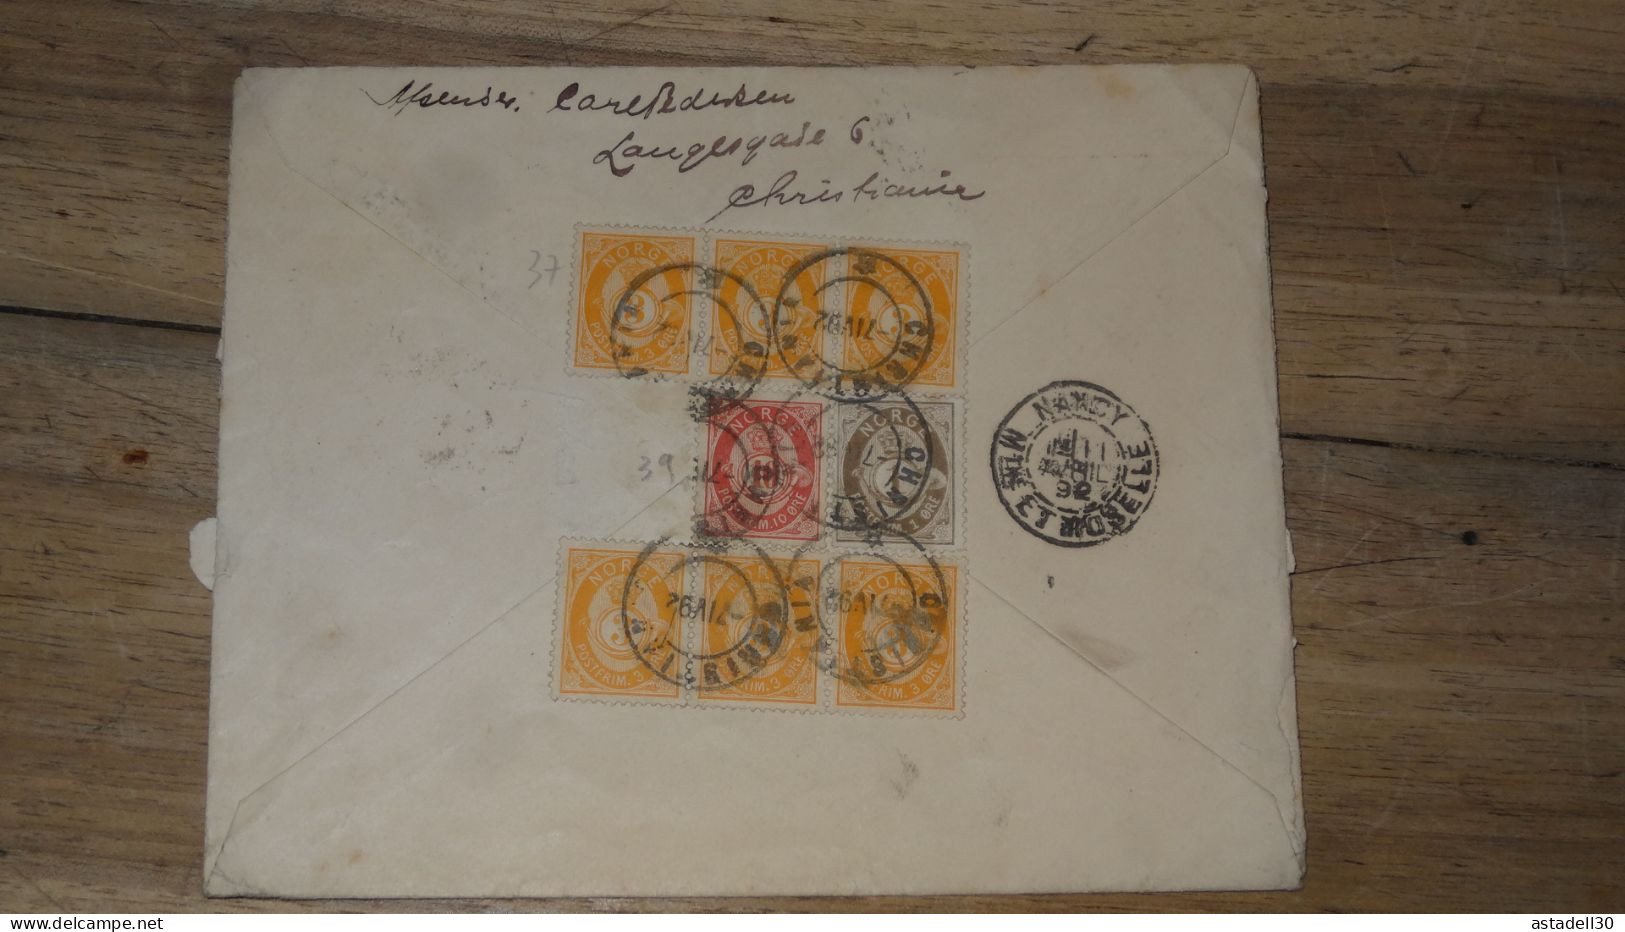 Enveloppe NORGE, Christiania 1892 ......... Boite1 ..... 240424-209 - Covers & Documents